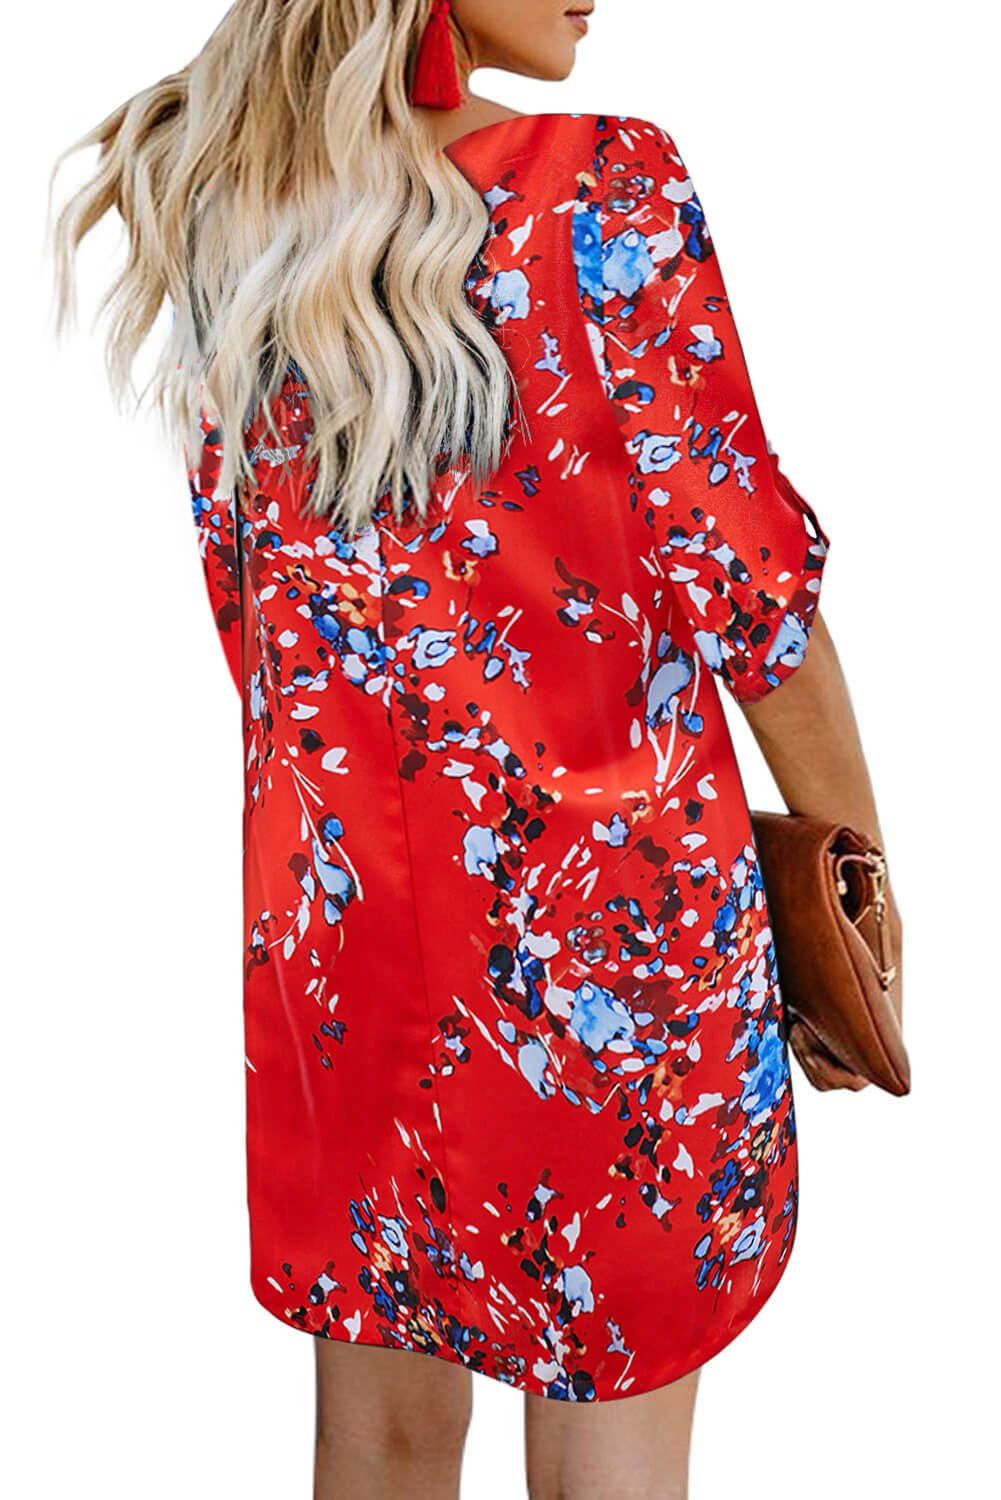 V Neck 3/4 Roll Sleeve Button Down Floral Dress